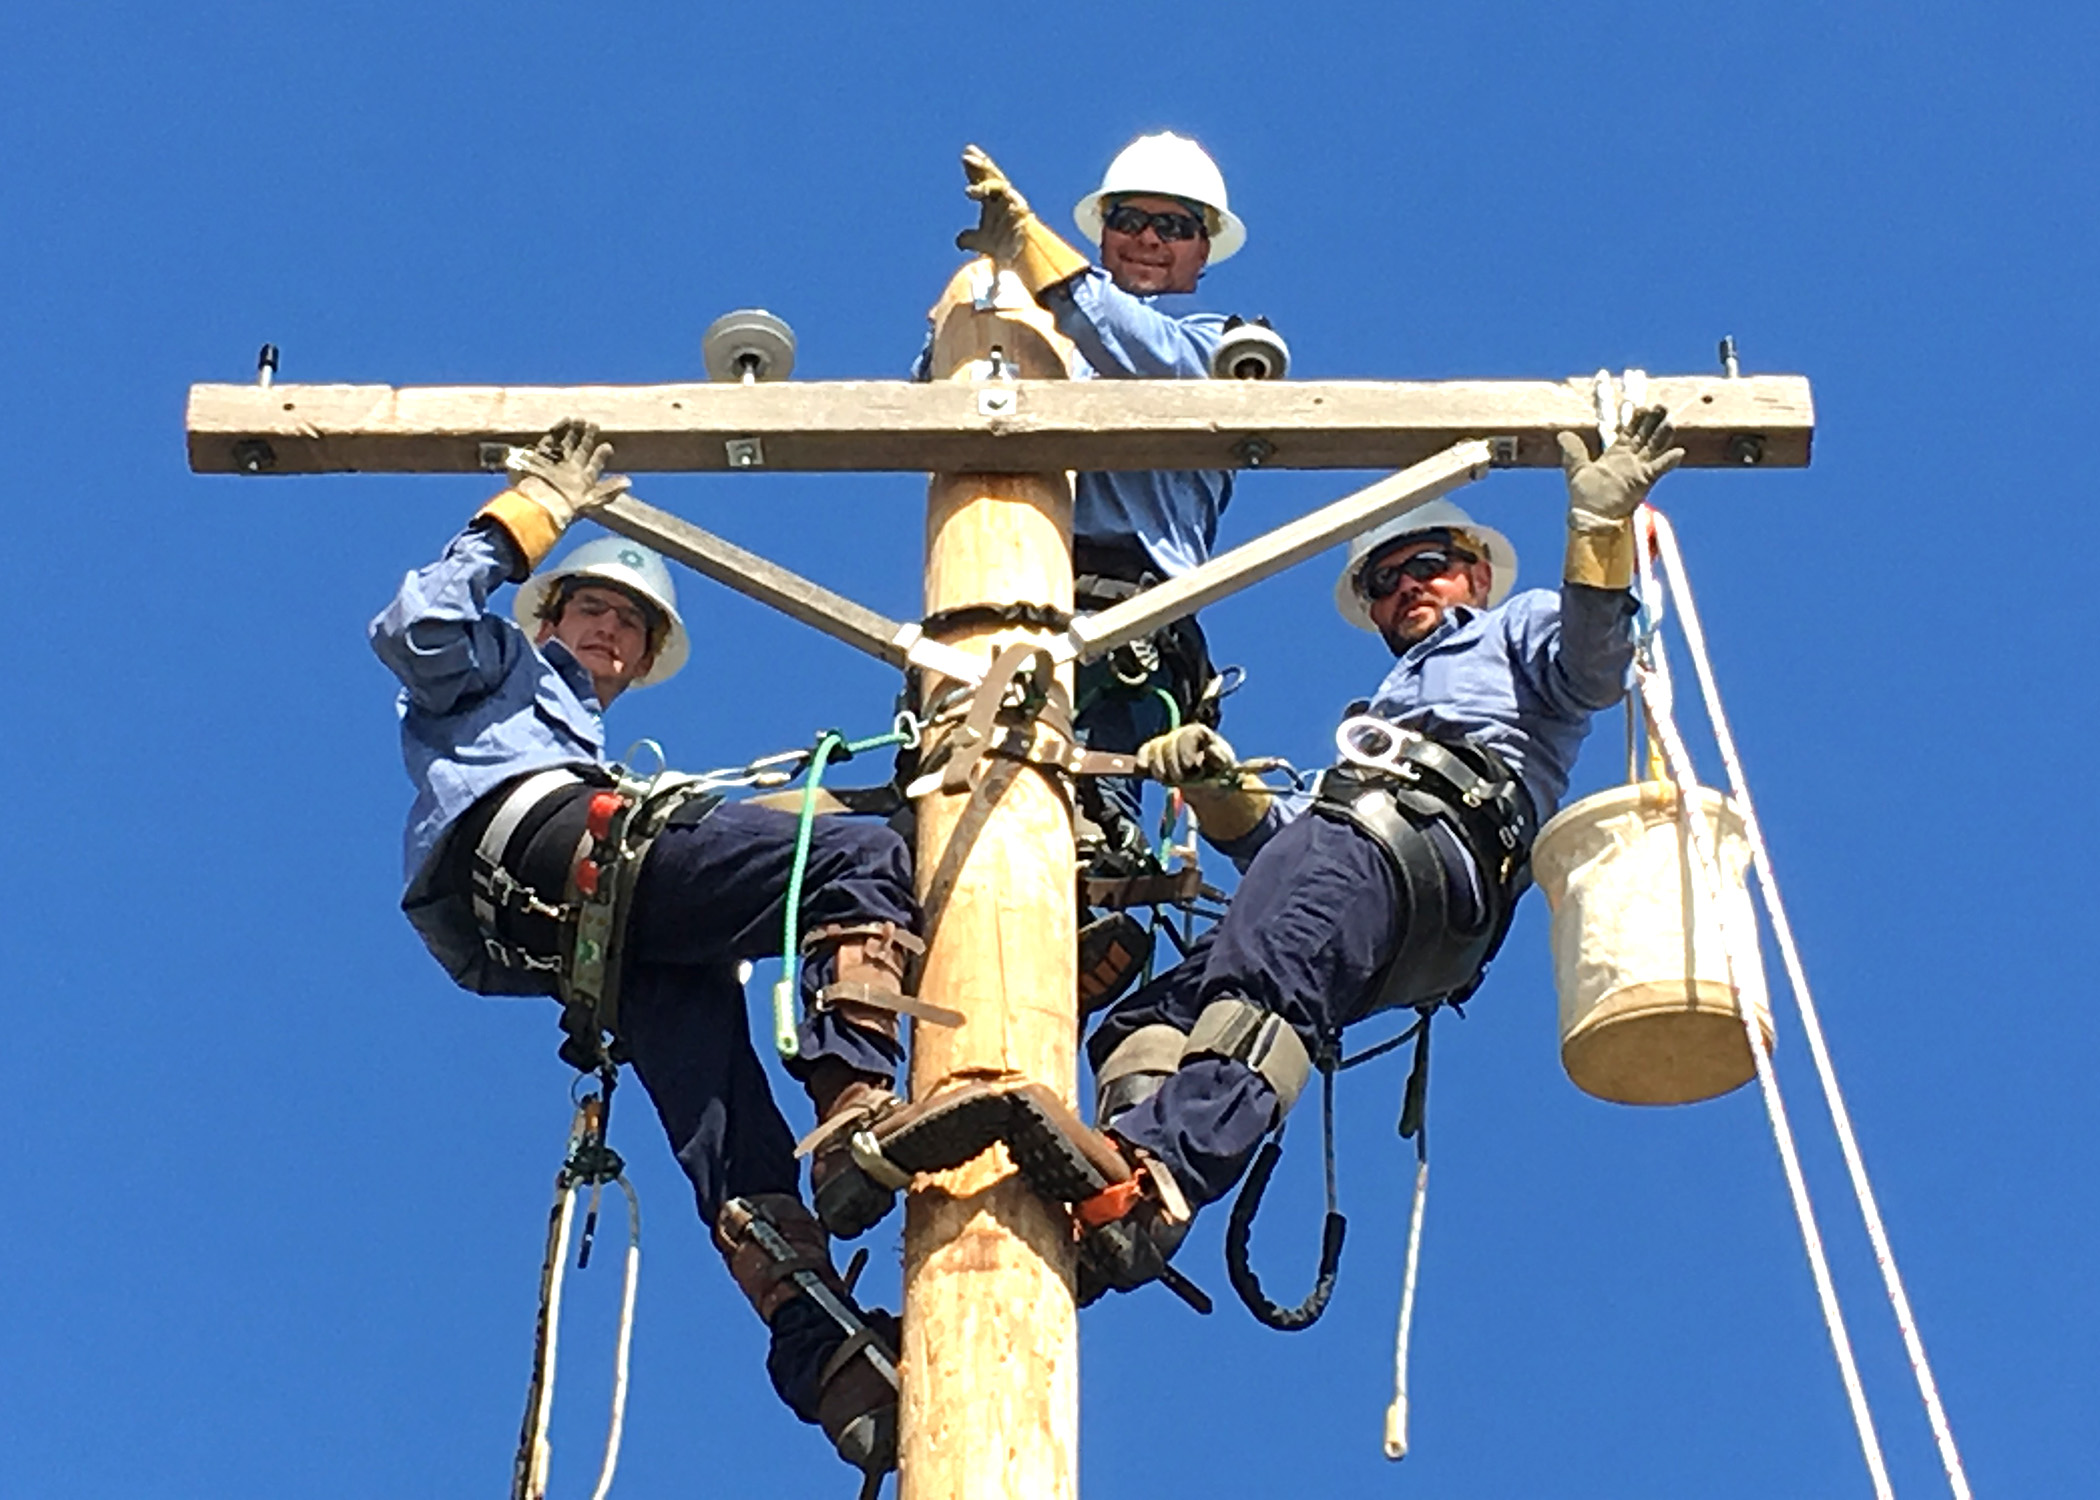 A photo of three linemen in blue shirts, manually climbing to the top of a training power pole, and looking down waving from atop the crossarm.